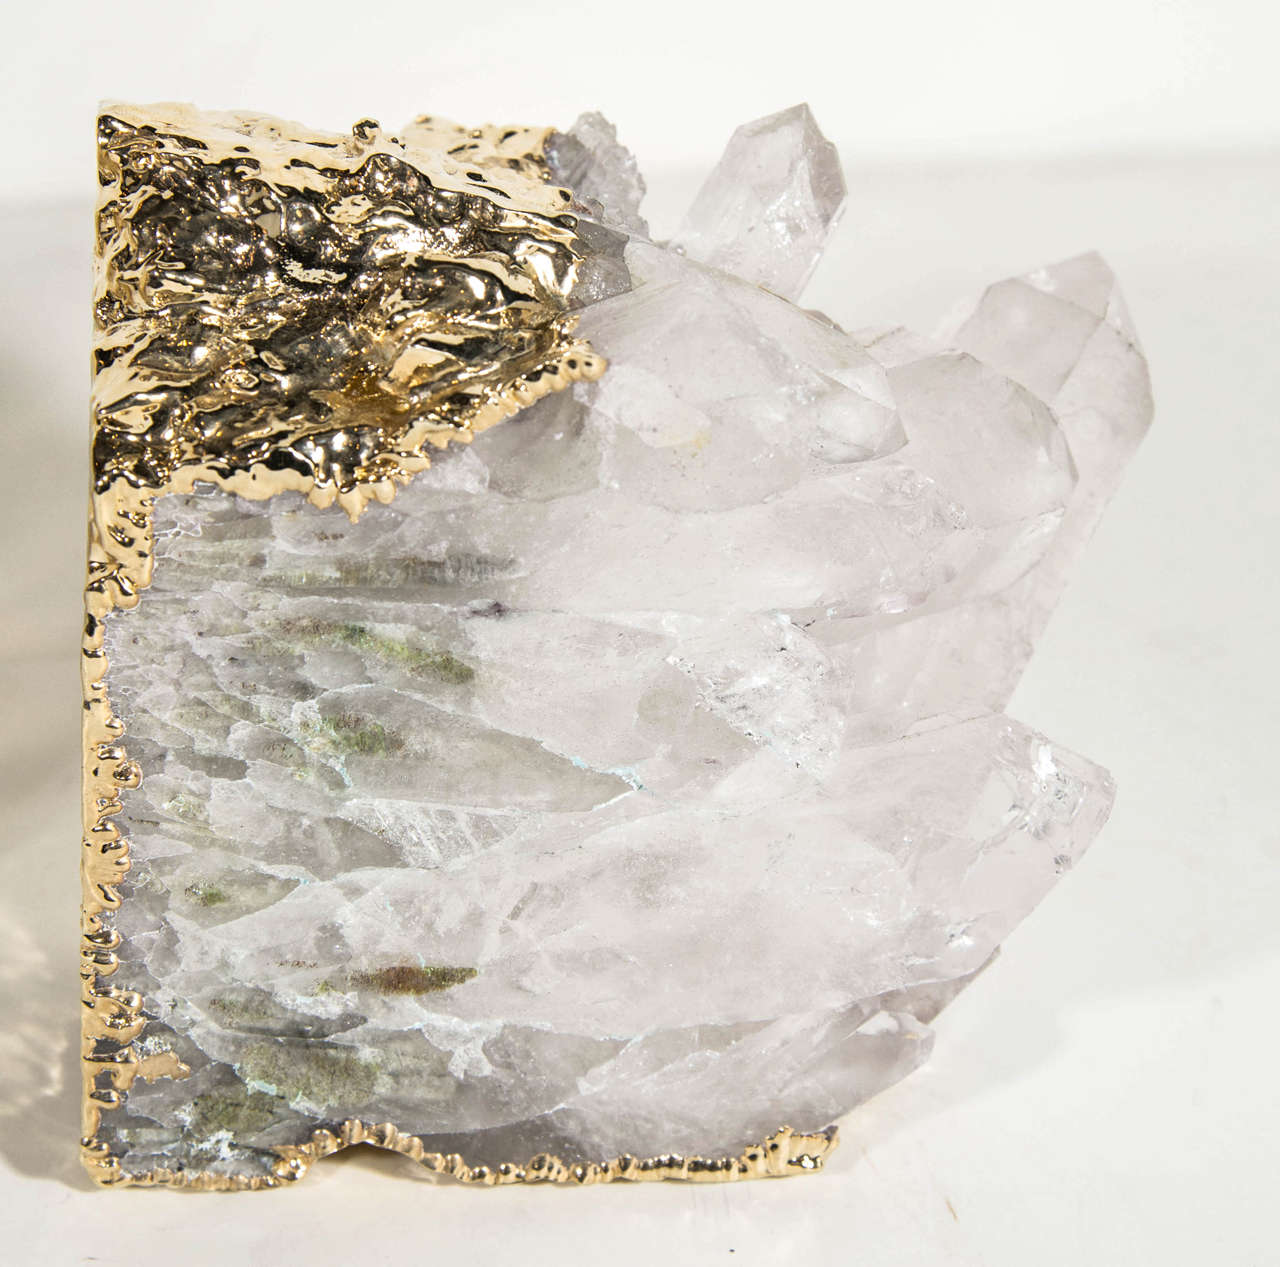 20th Century Pair of Exquisite Rock Crystal Quartz Bookends Wrapped in 24K Gold